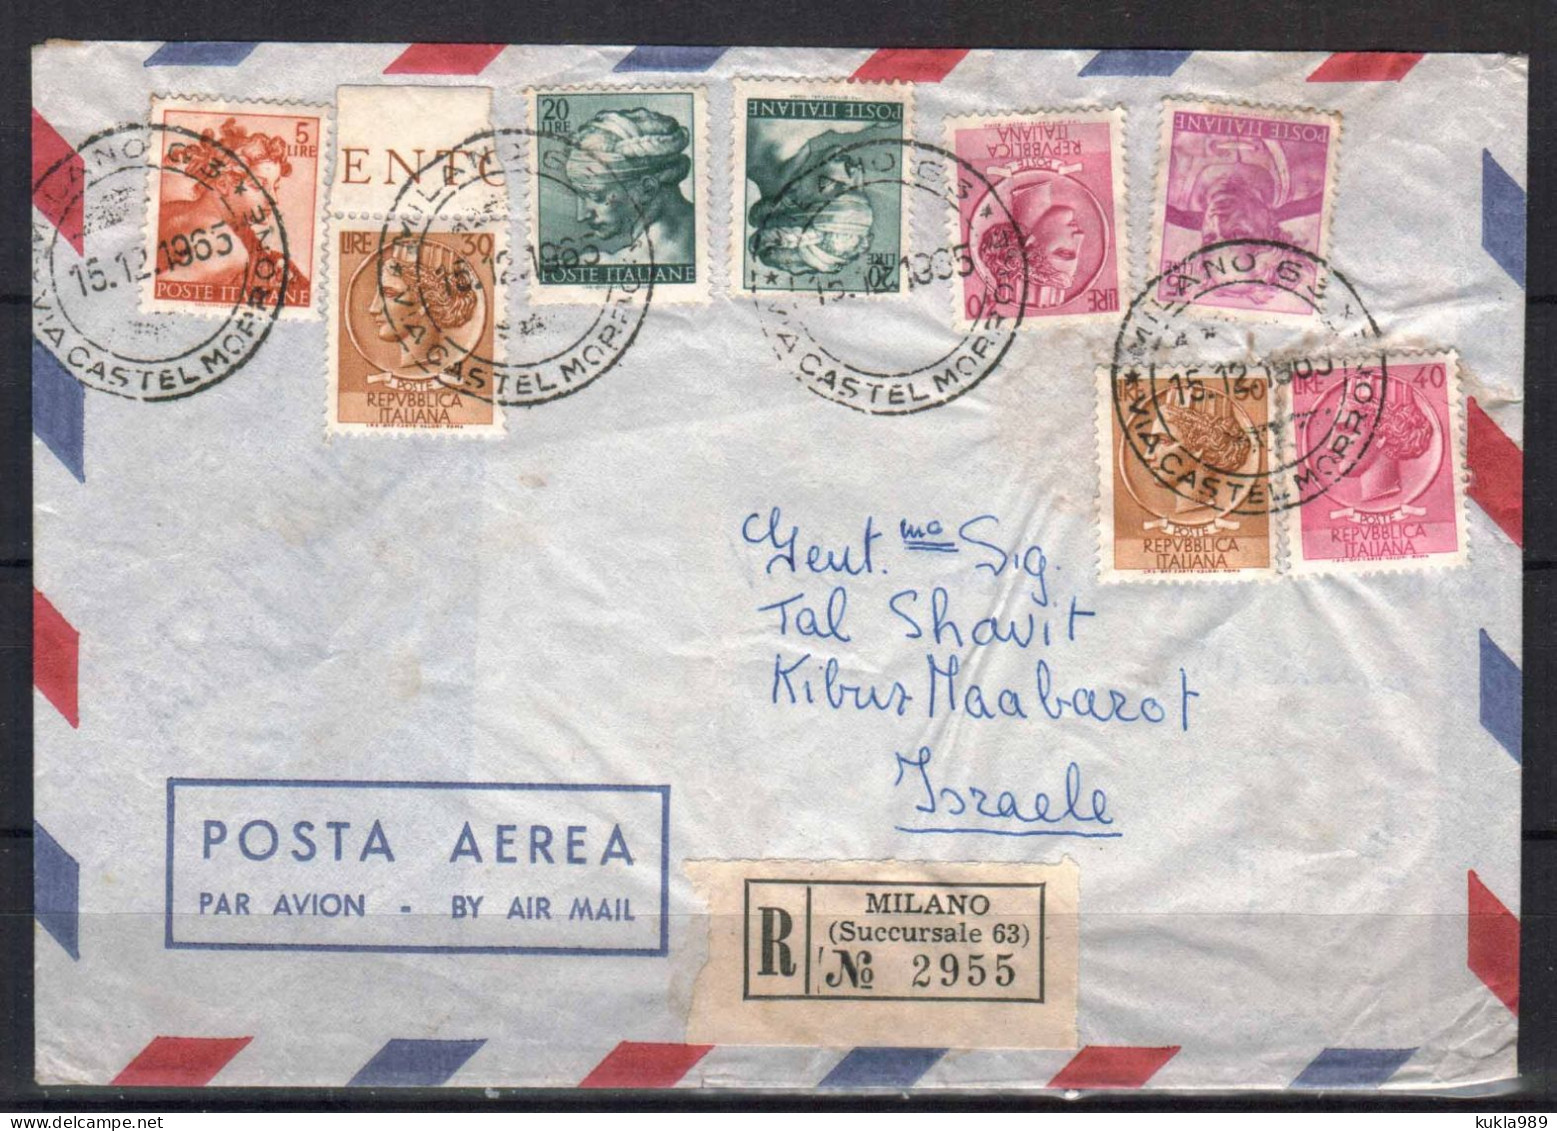 ITALY STAMPS. 1965 REG. COVER TO ISRAEL - Luftpost